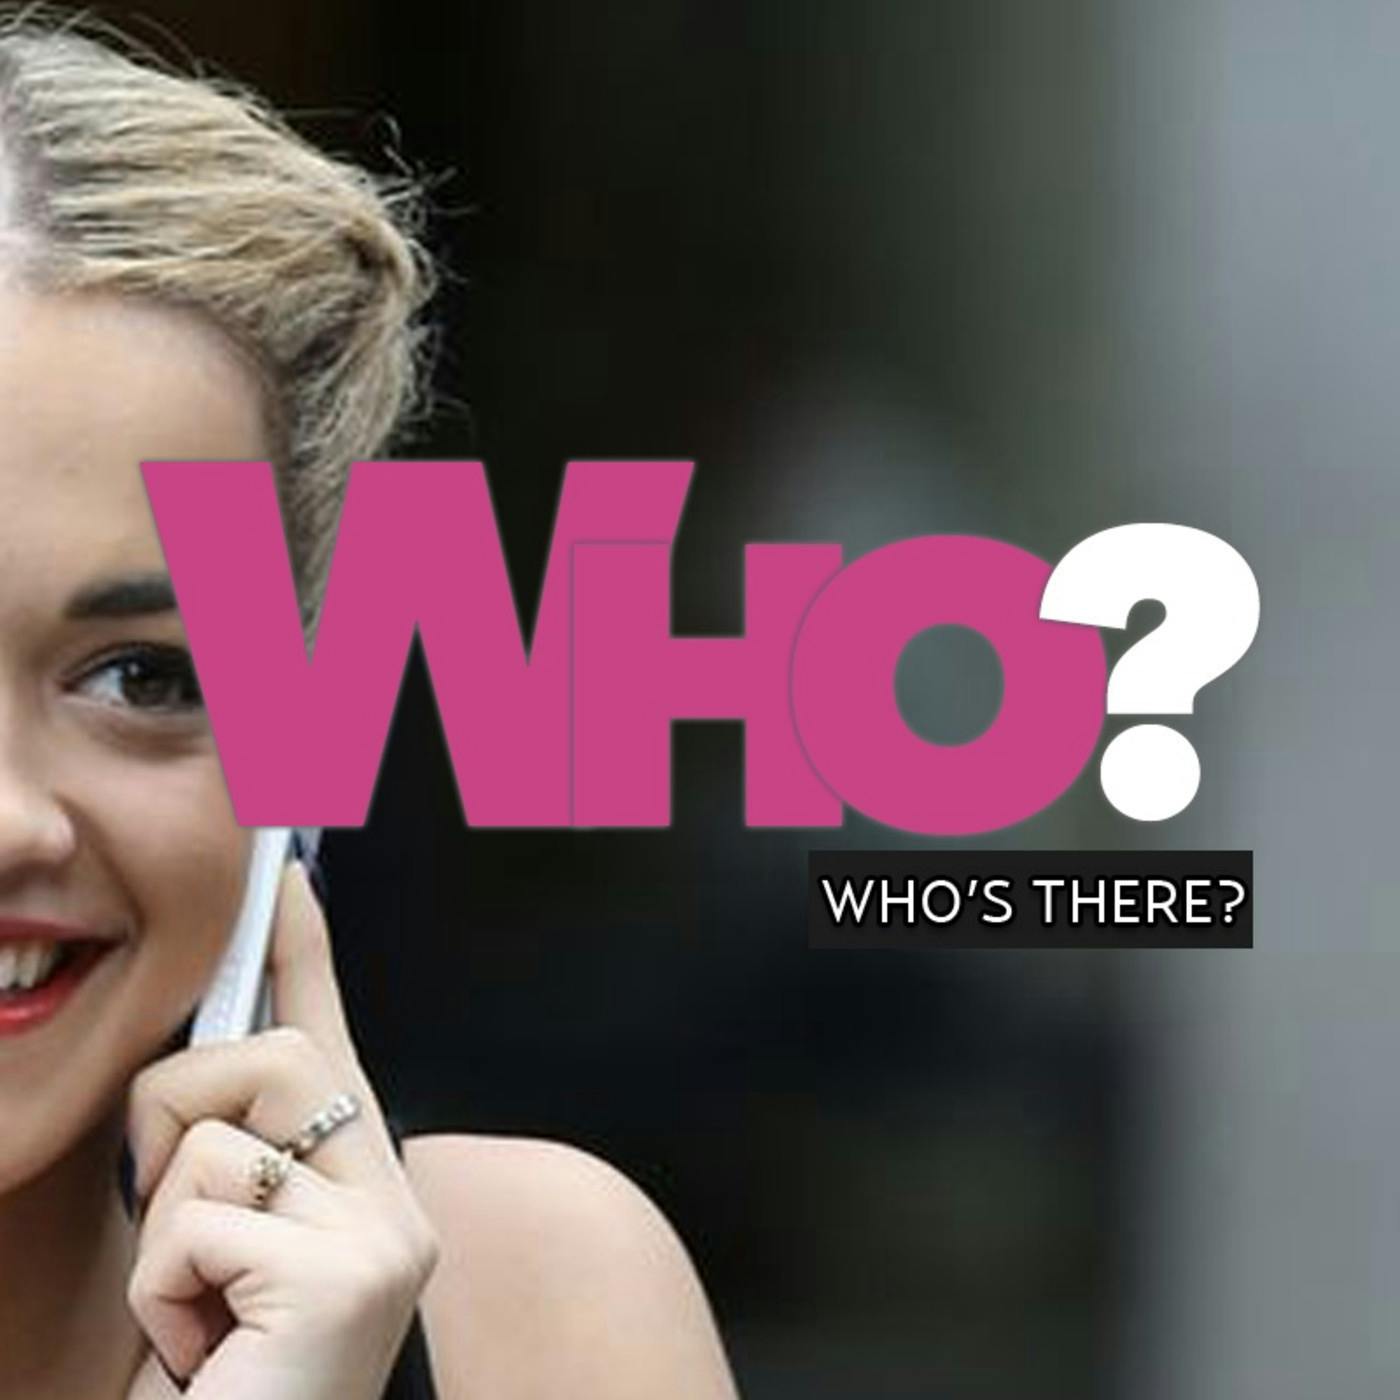 Who's There: Cody Simpson & Little Mix?